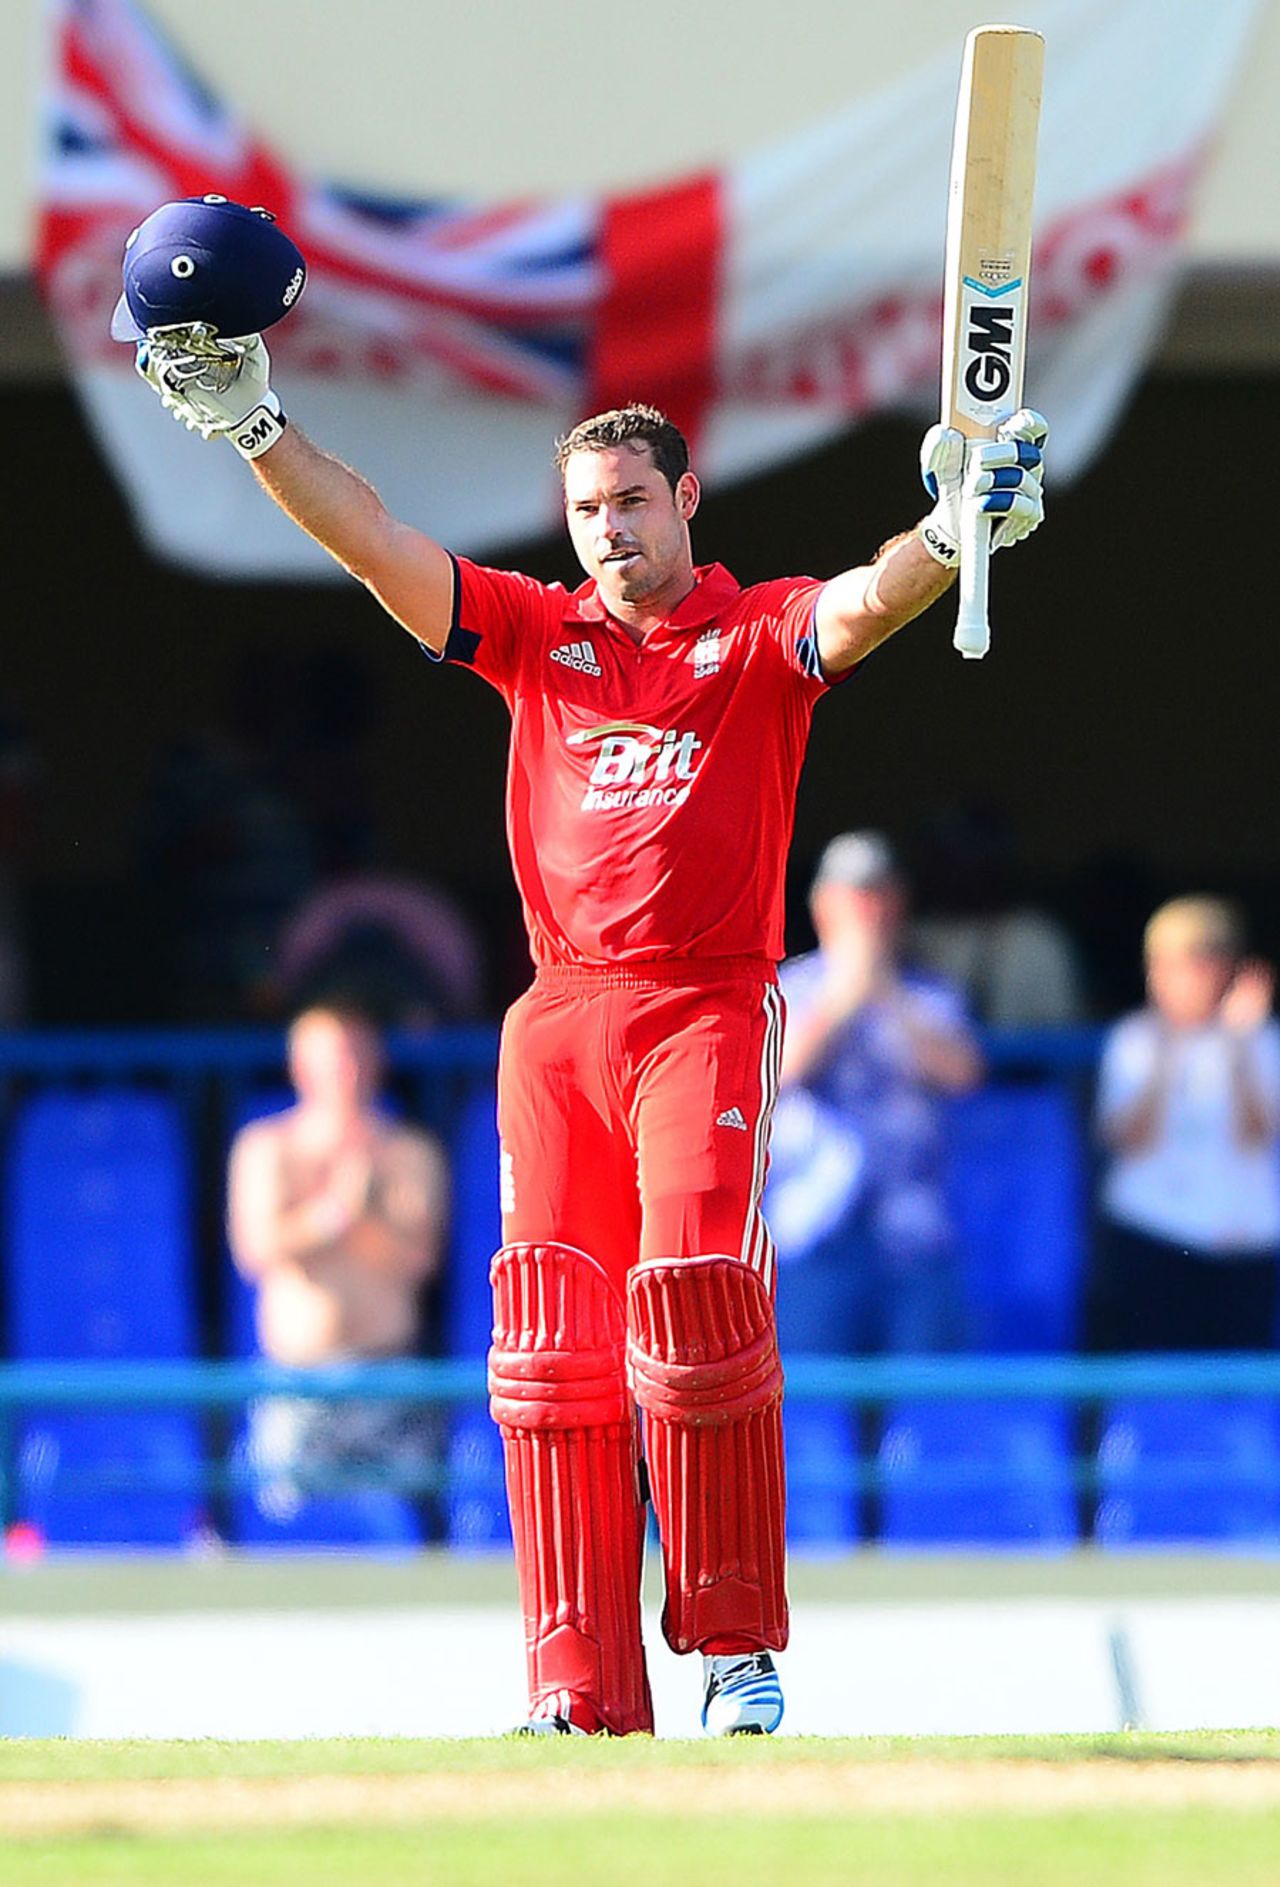 Michael Lumb takes the applause for his century, West Indies v England, 1st ODI, North Sound, February 28, 2014